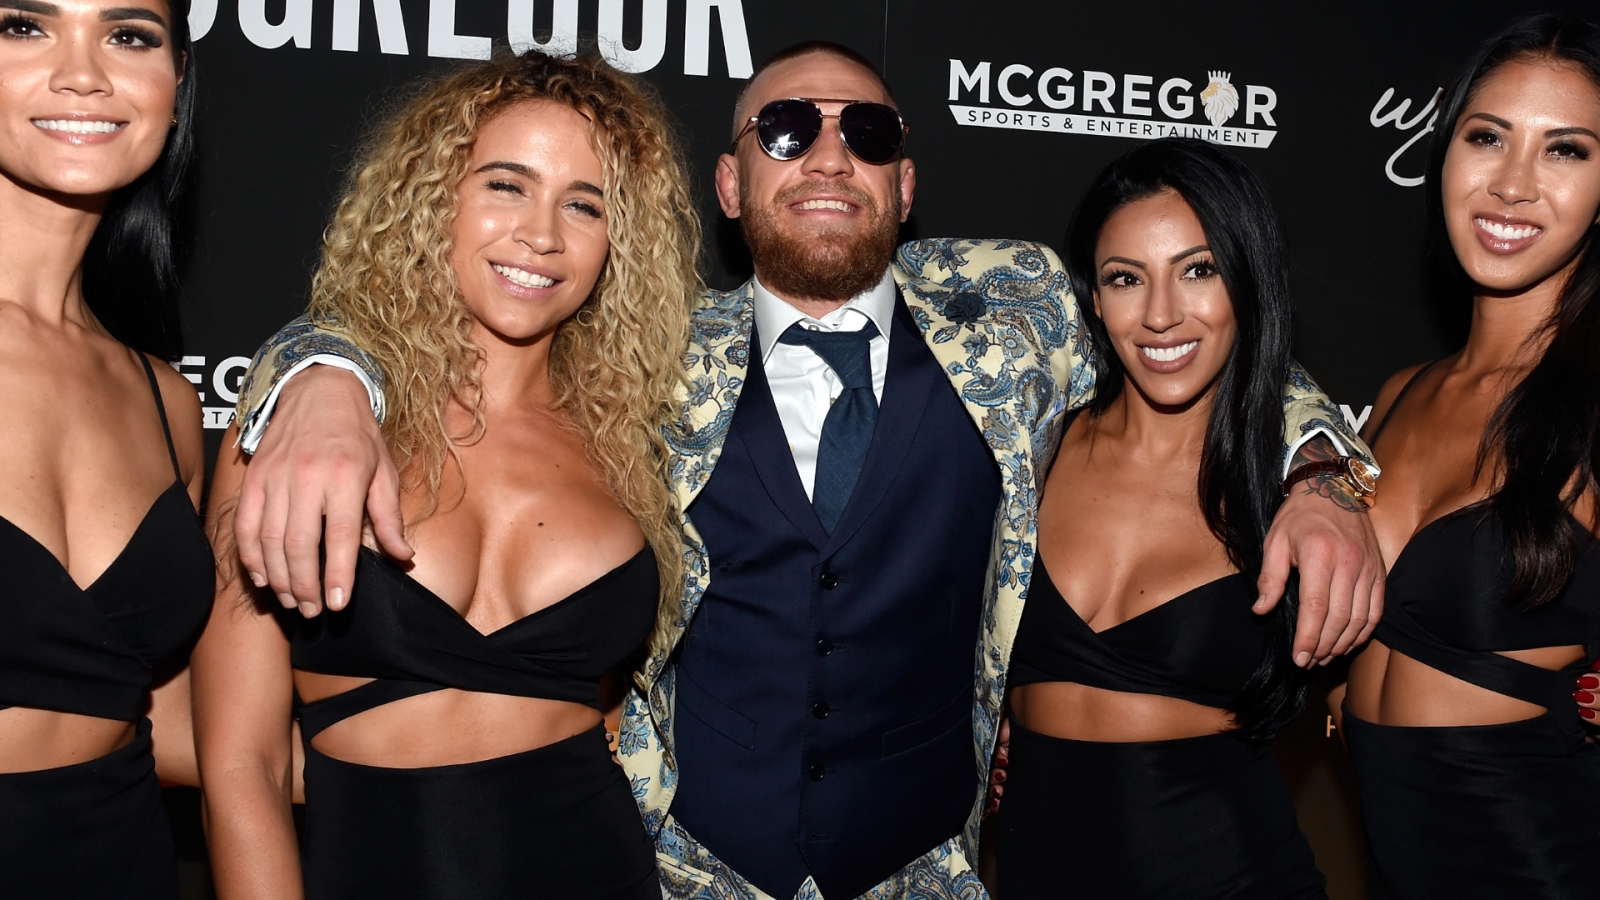 Rita Ora who? Conor McGregor shares loved-up private jet snap with 'keeper' Dee Devlin1600 x 900